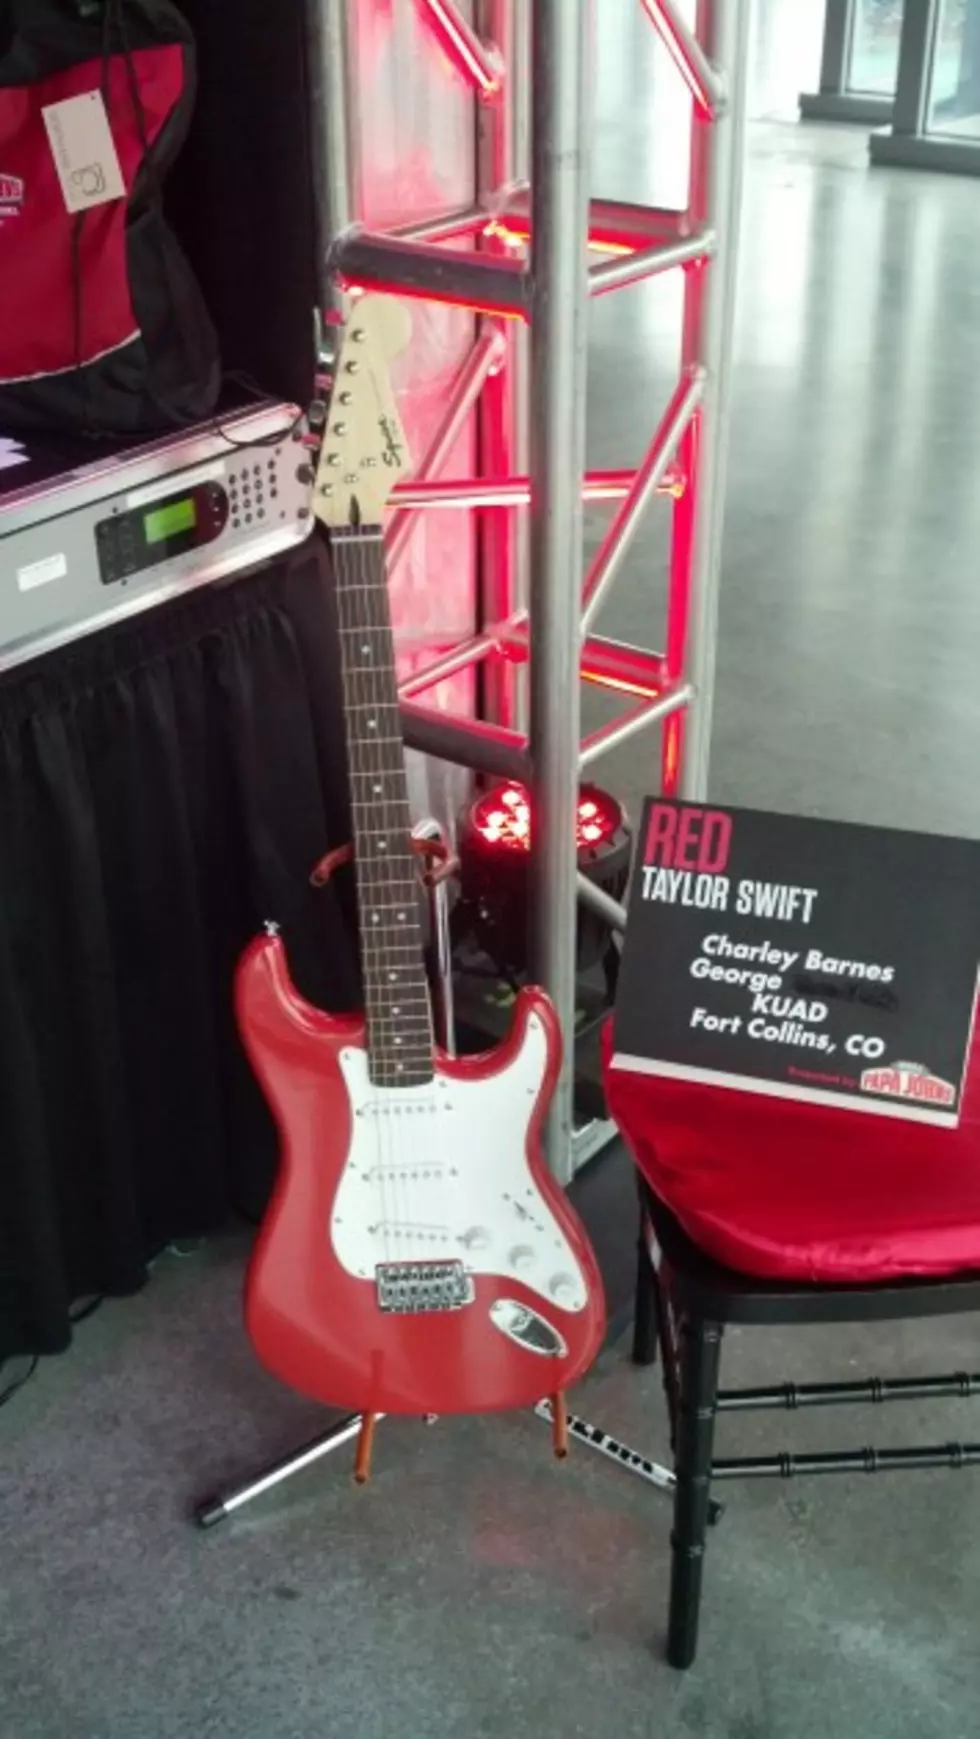 Win This Signed Guitar Today With Taylor Swift and Charley Barnes